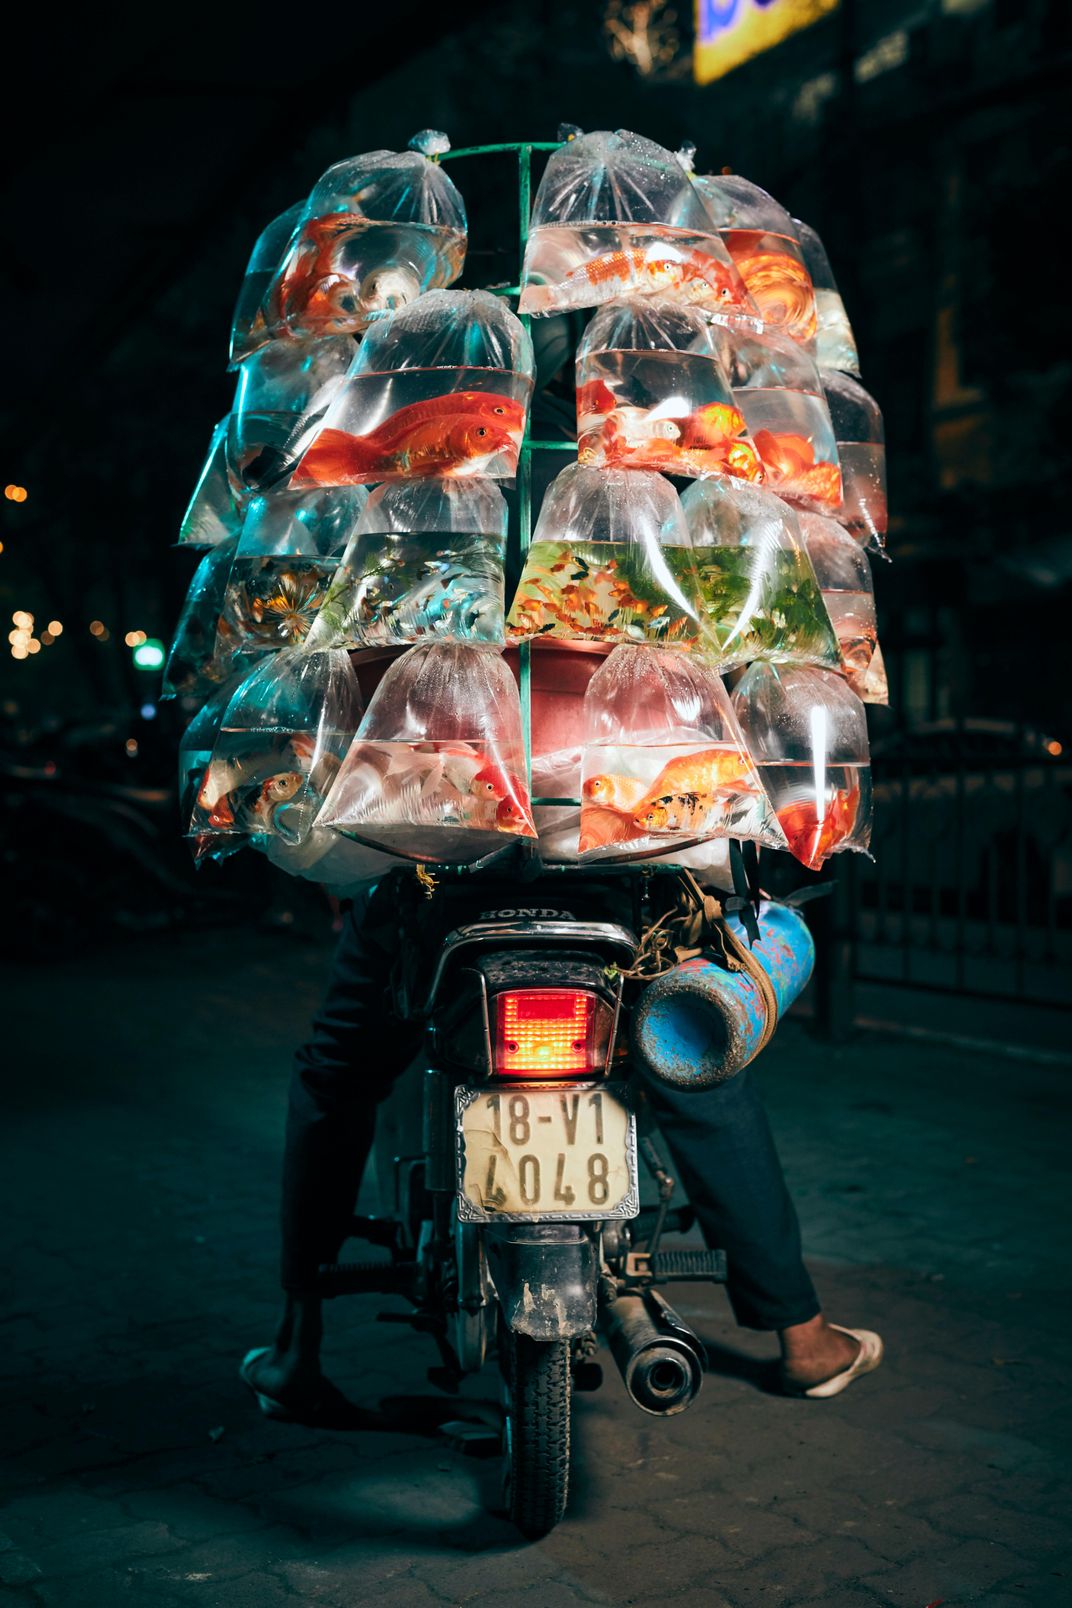 A motorbike delivery driver with bags of fish for sale